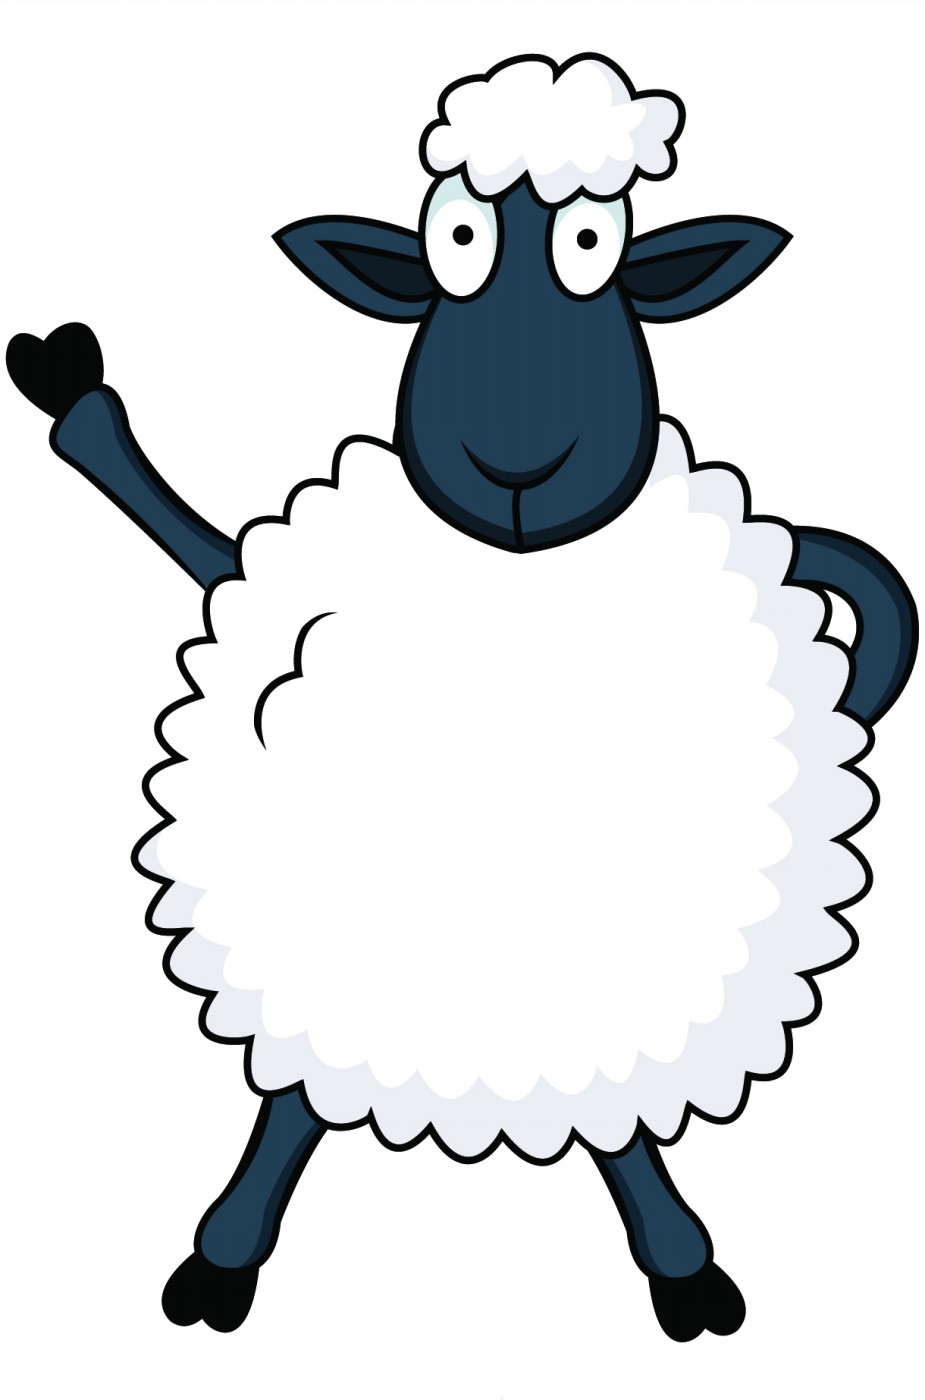 Sheep Cartoon Images - Cliparts.co